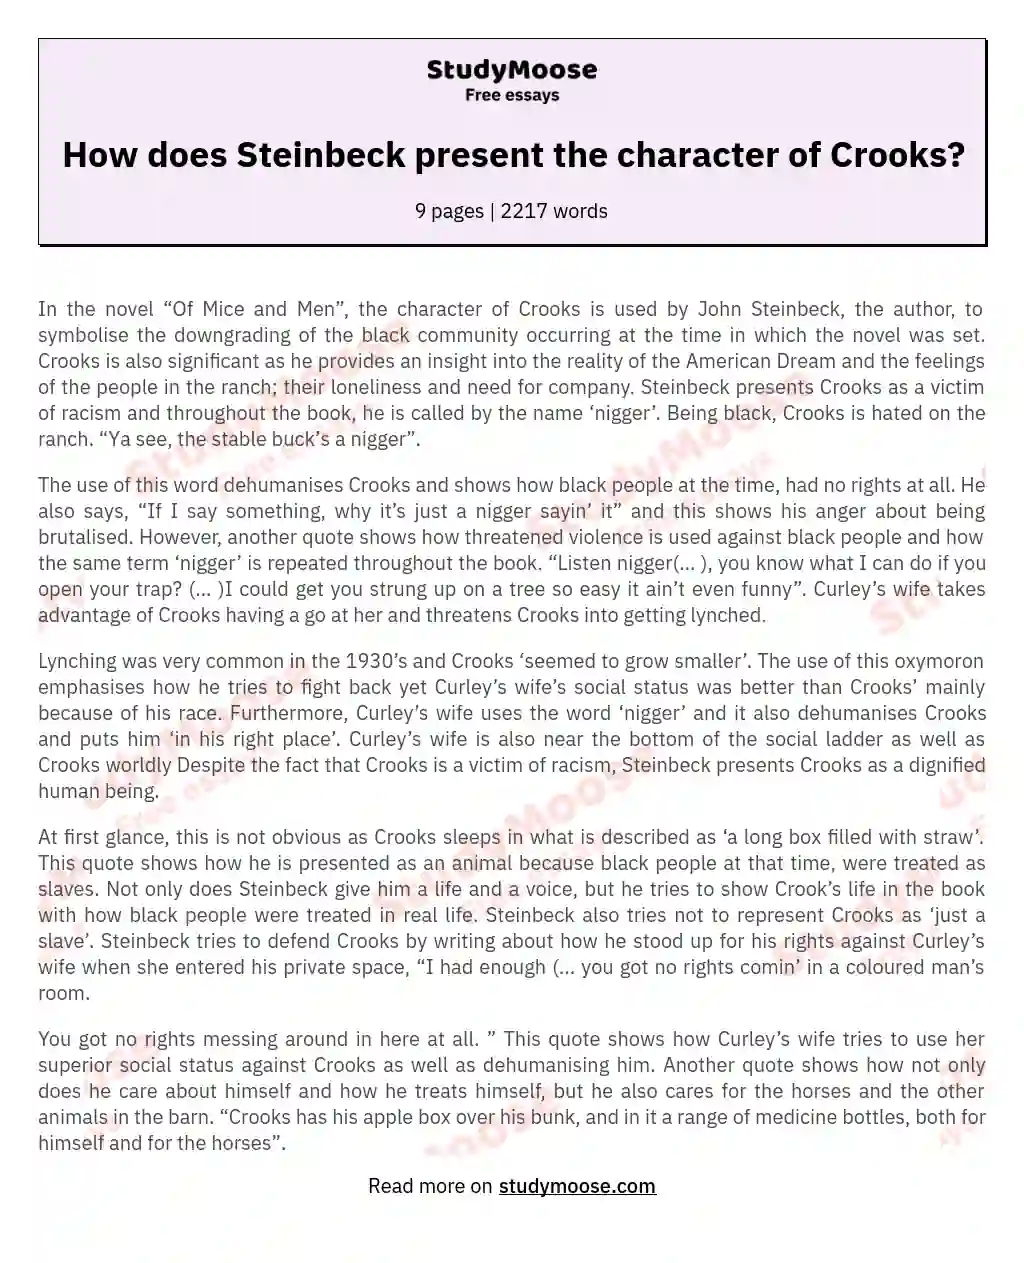 How does Steinbeck present the character of Crooks? essay